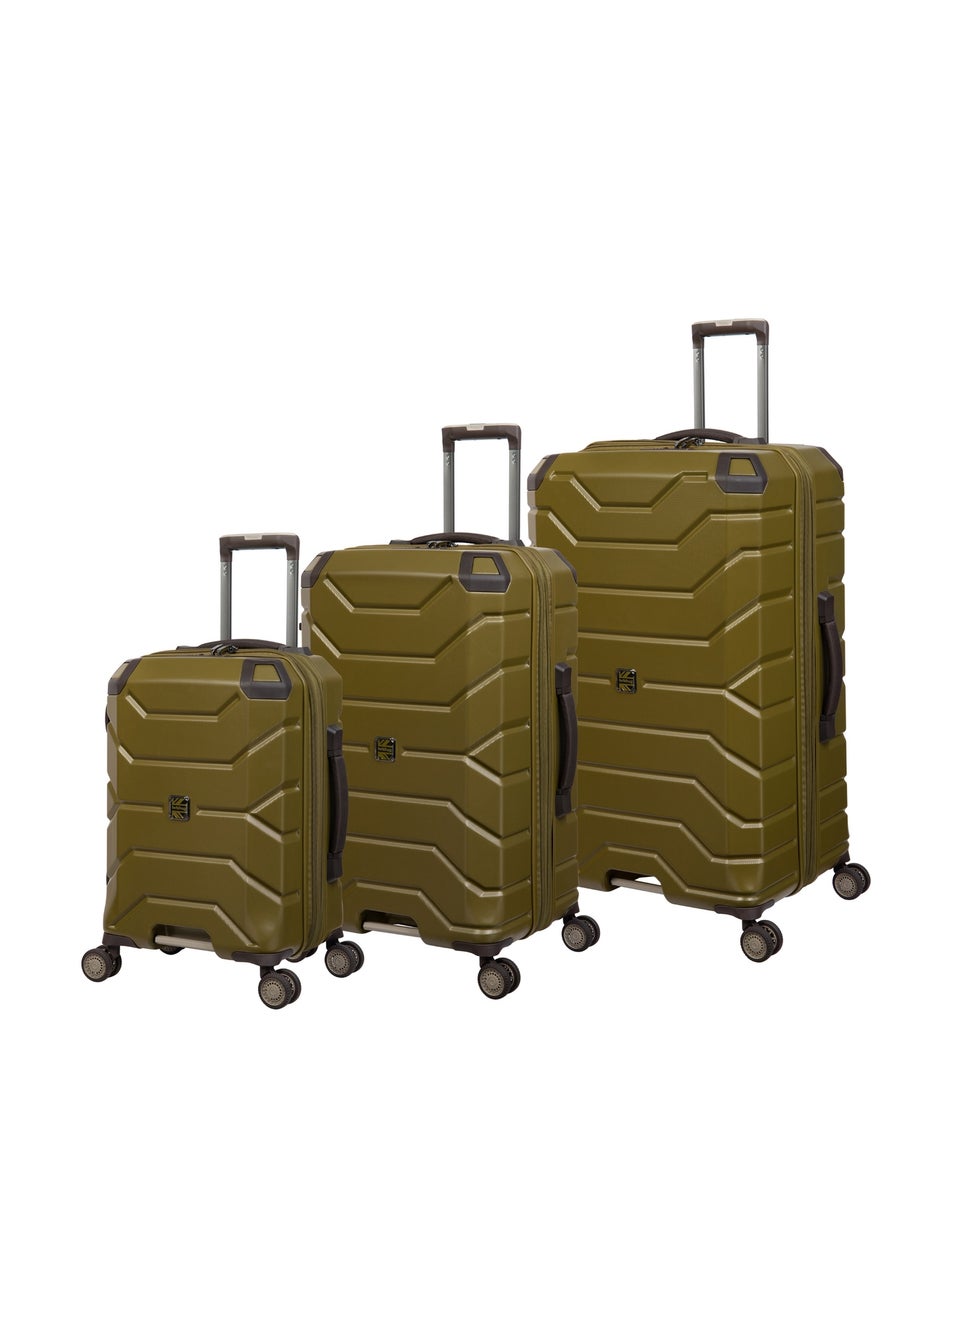 BritBag Galloway Olive Nut Suitcase with TSA Lock